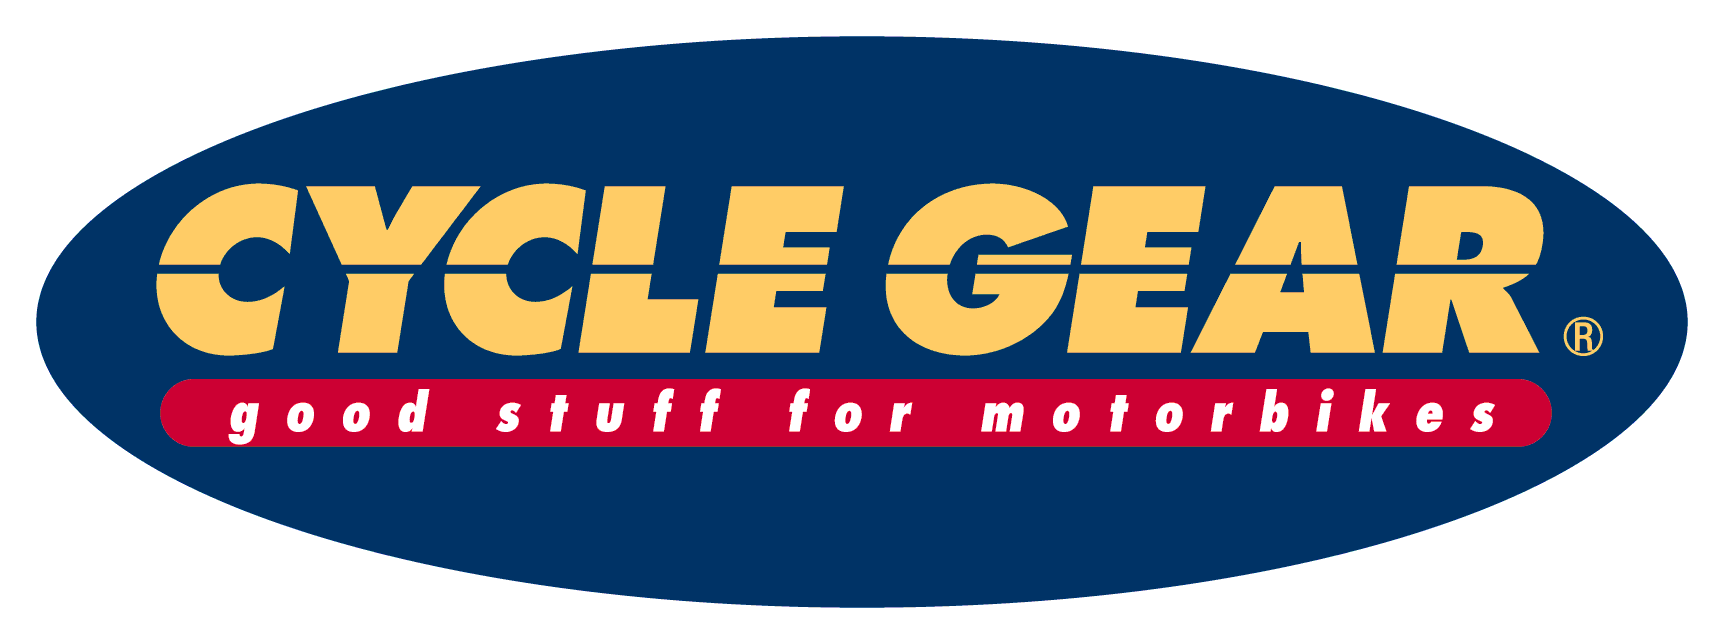 cycle-gear-direct_coupons